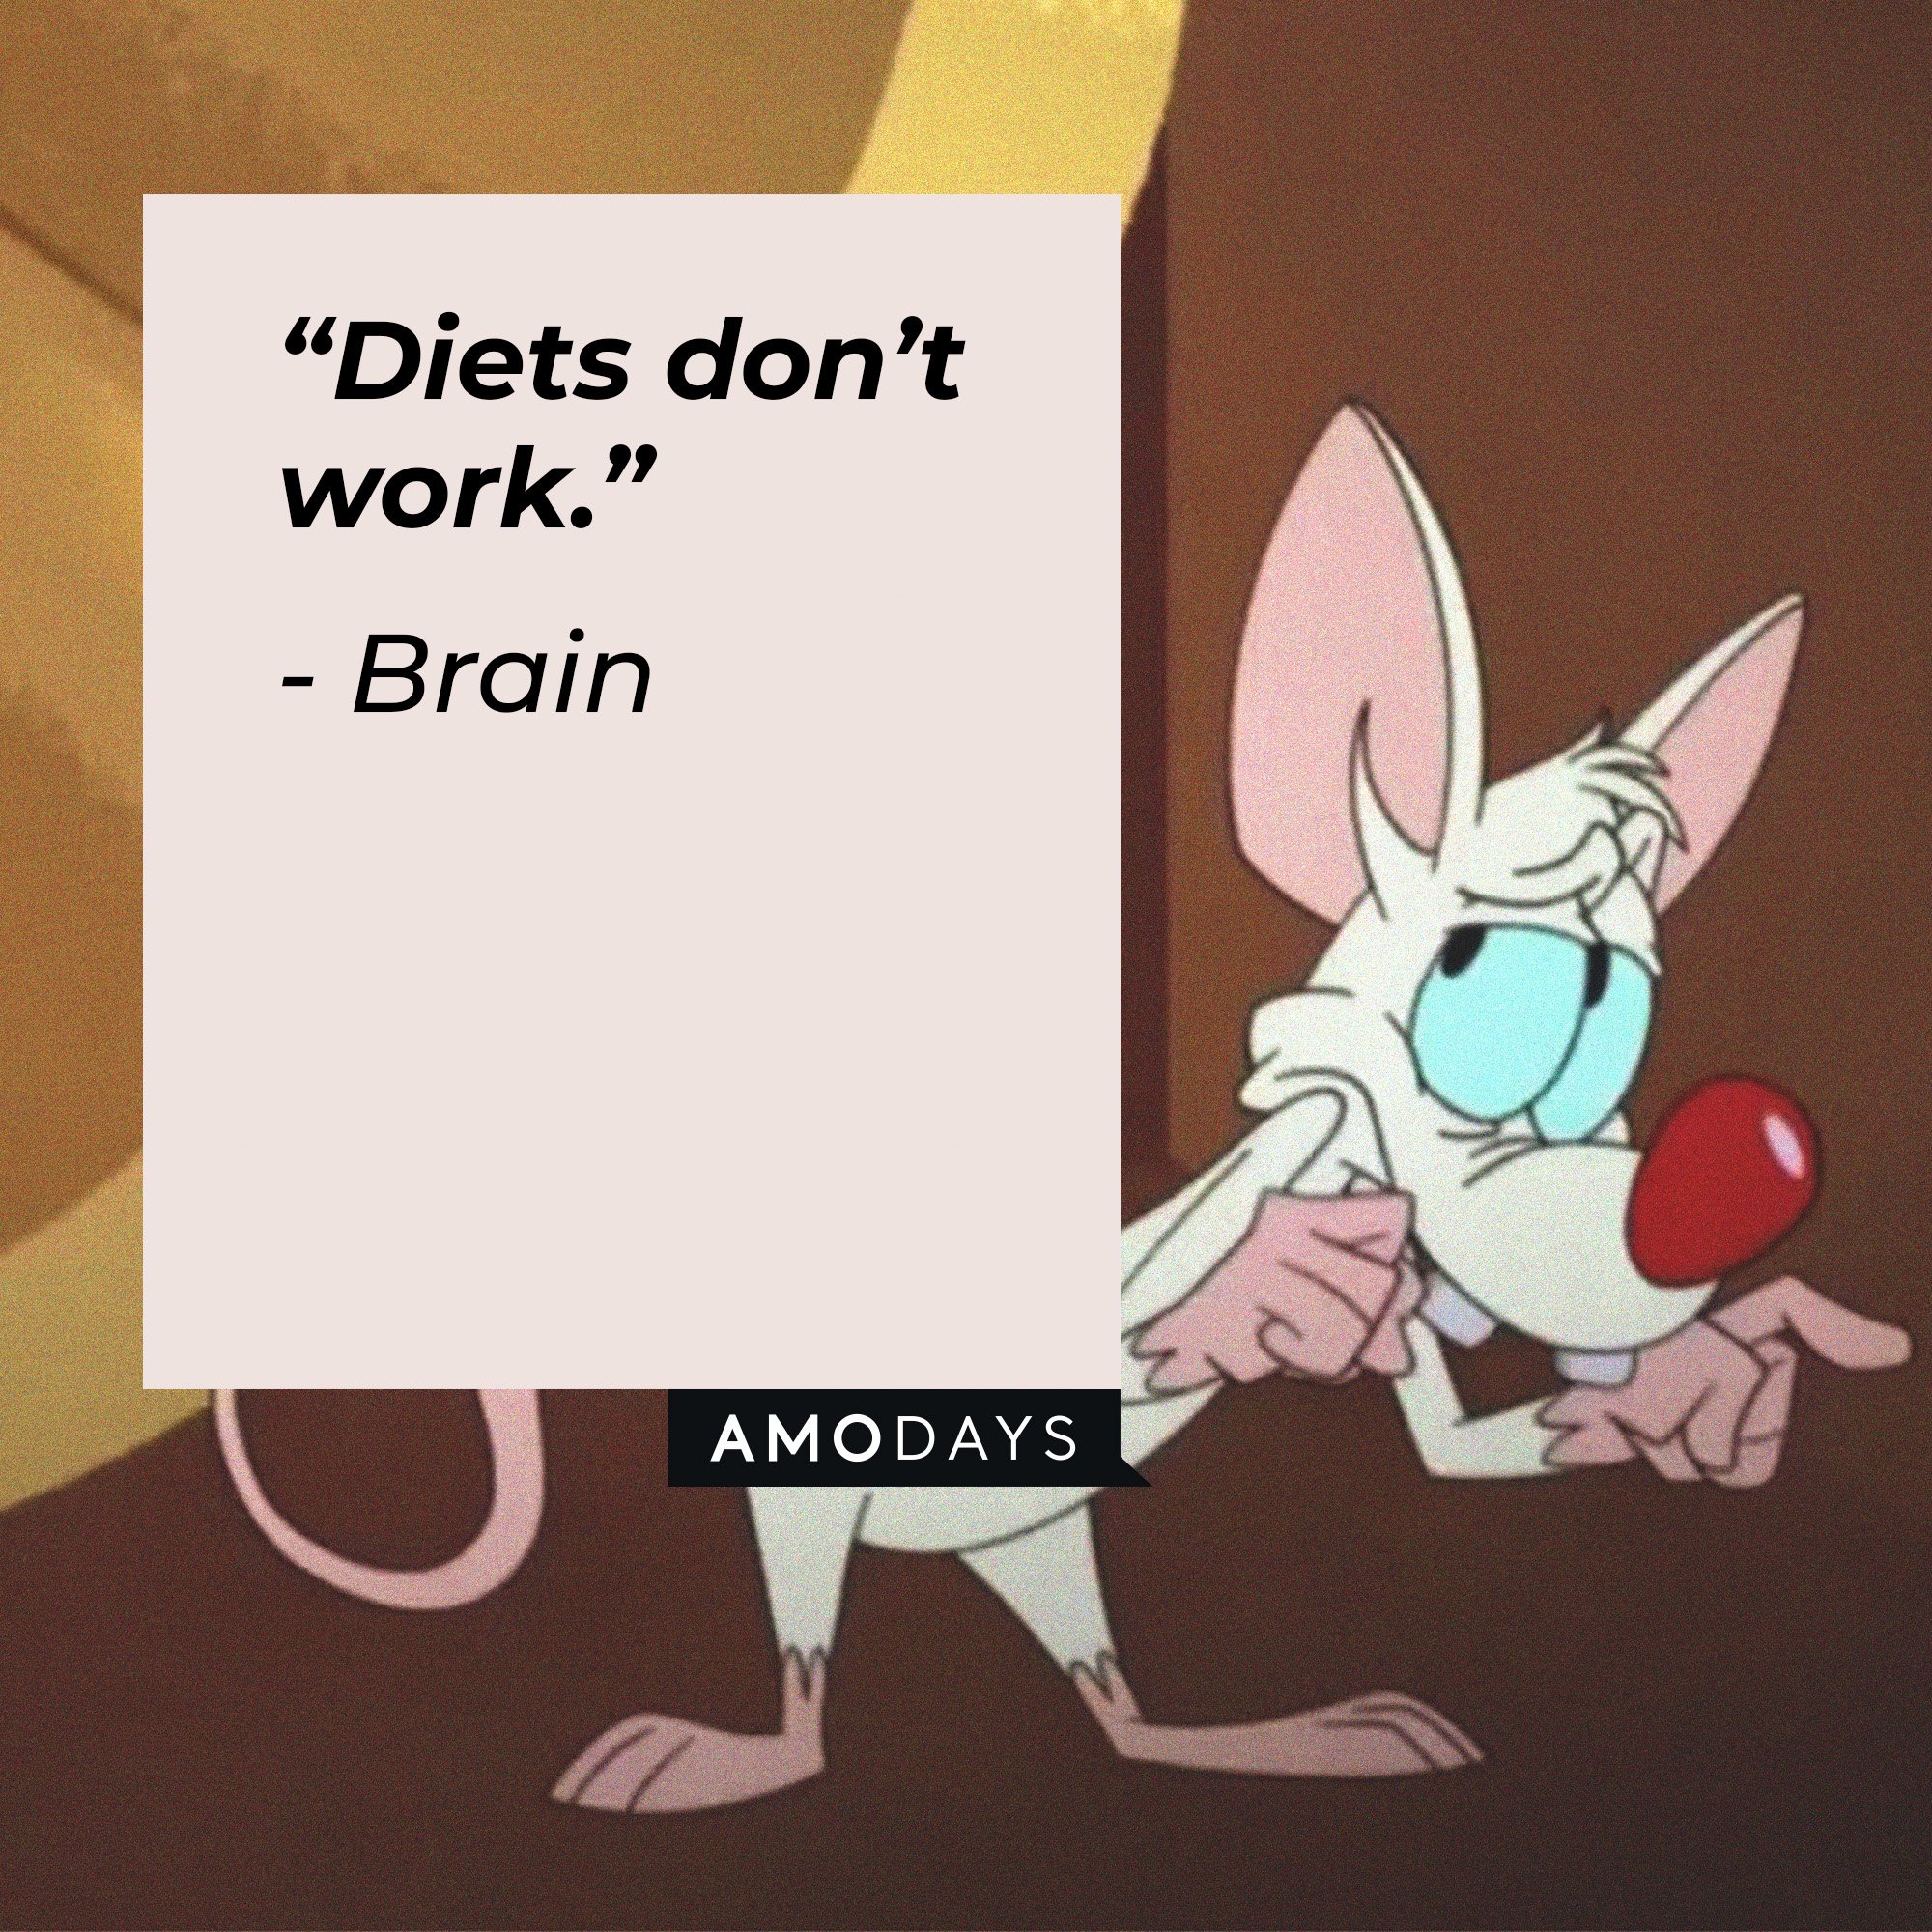 Brain's quote: “Diets don’t work.” | Image: AmoDays